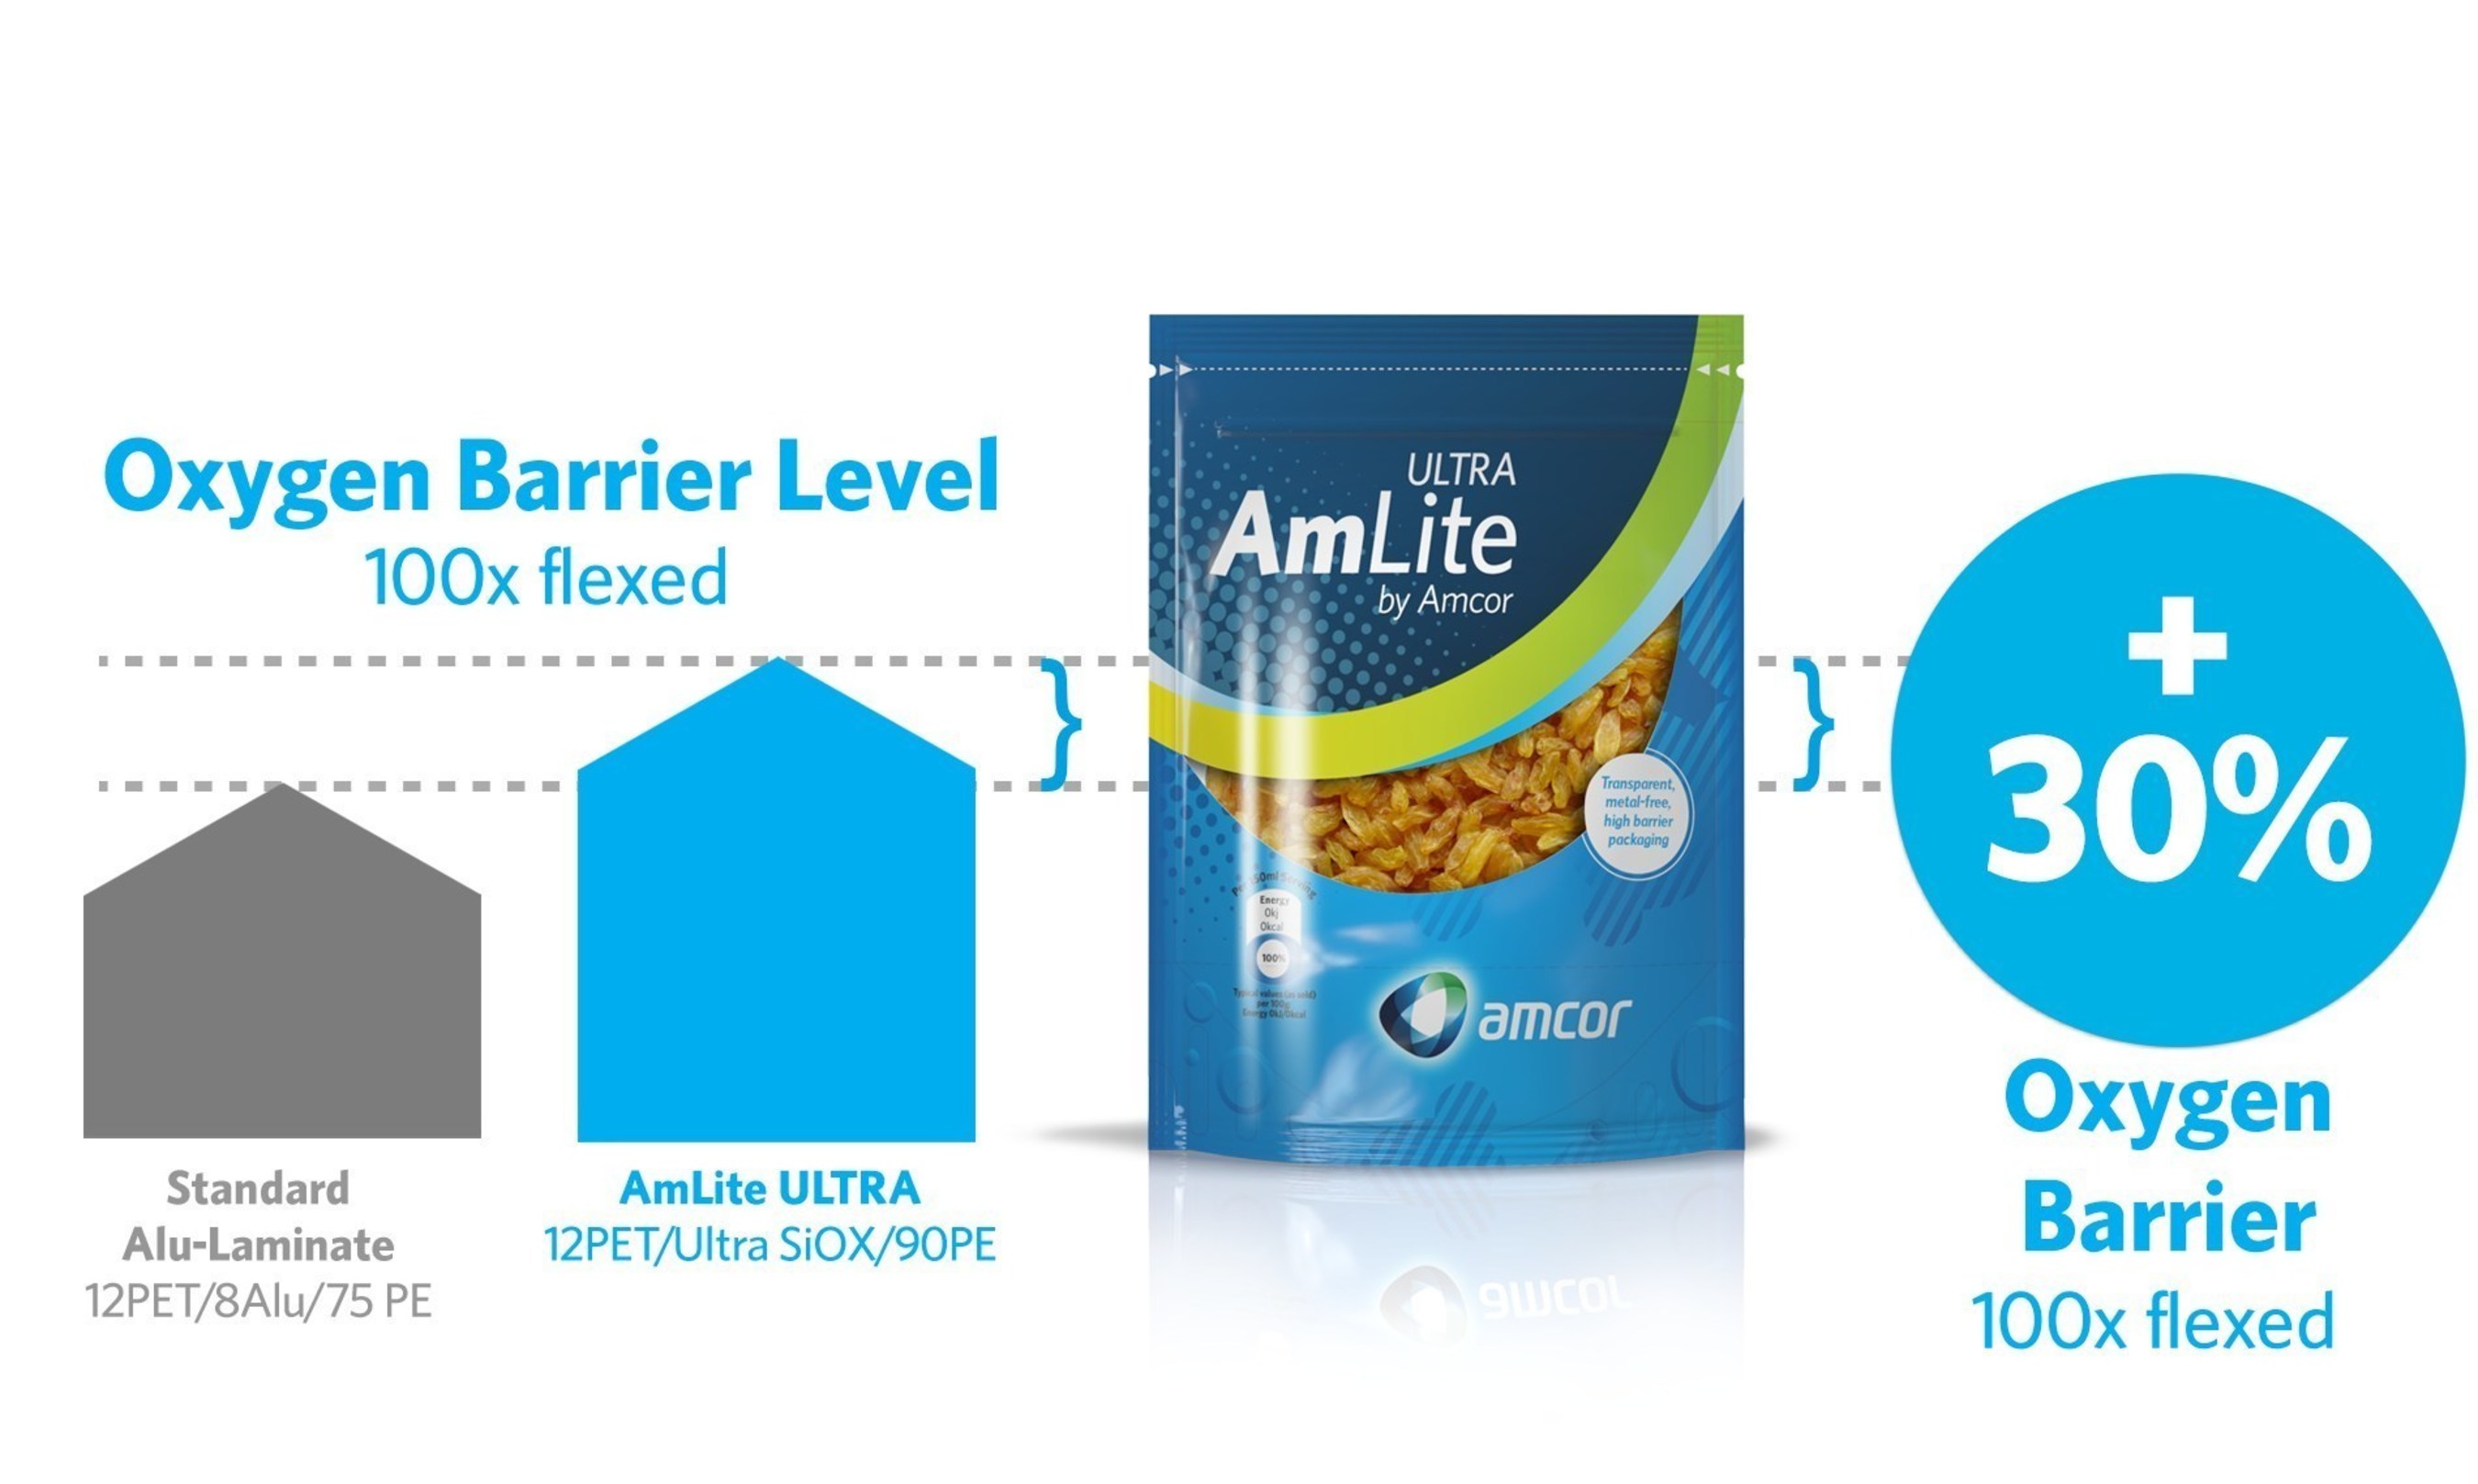 The AmLite Ultra oxygen barrier tested 30% higher than that of the standard aluminium laminate after 100 Gelbo-Flex cycles